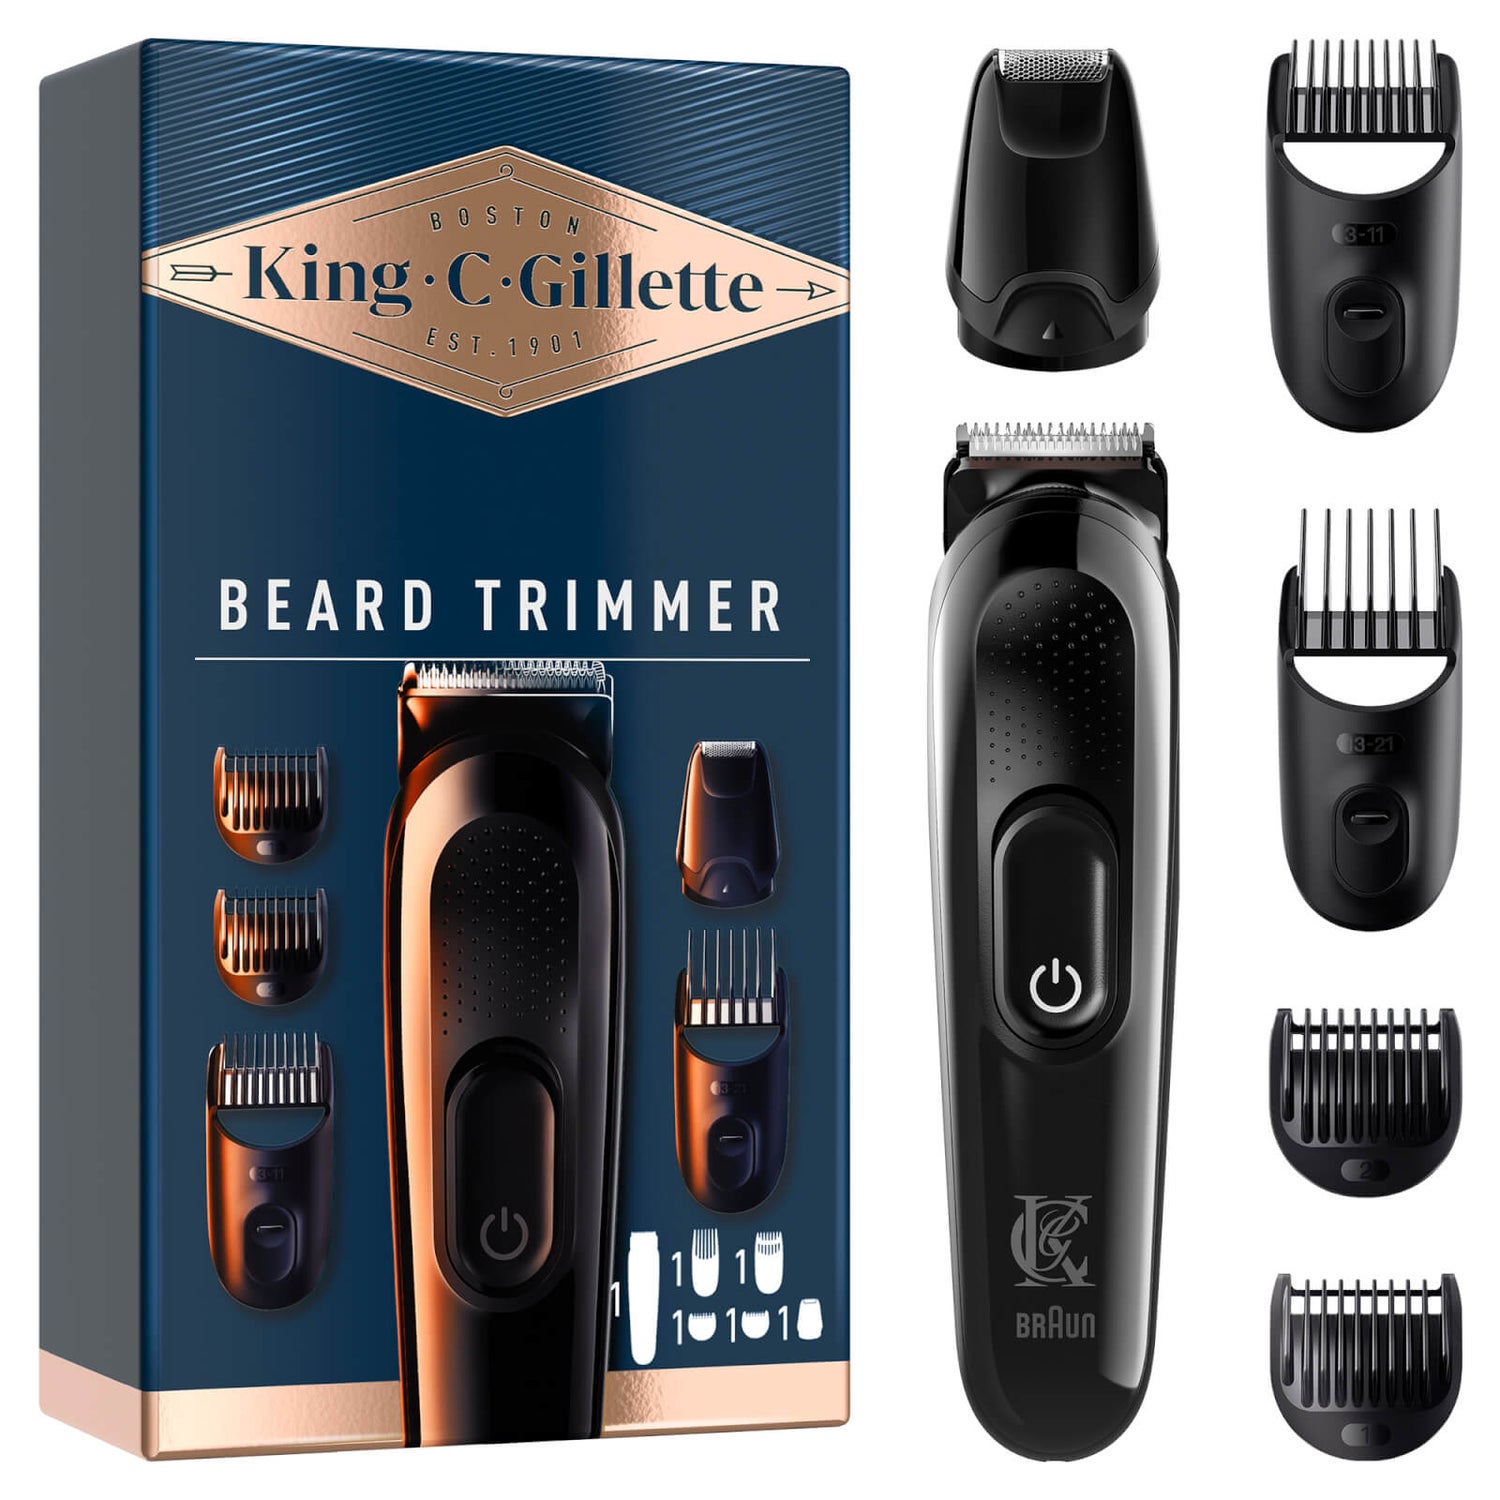 King C. Gillette Beard Trimmer With 4 Combs